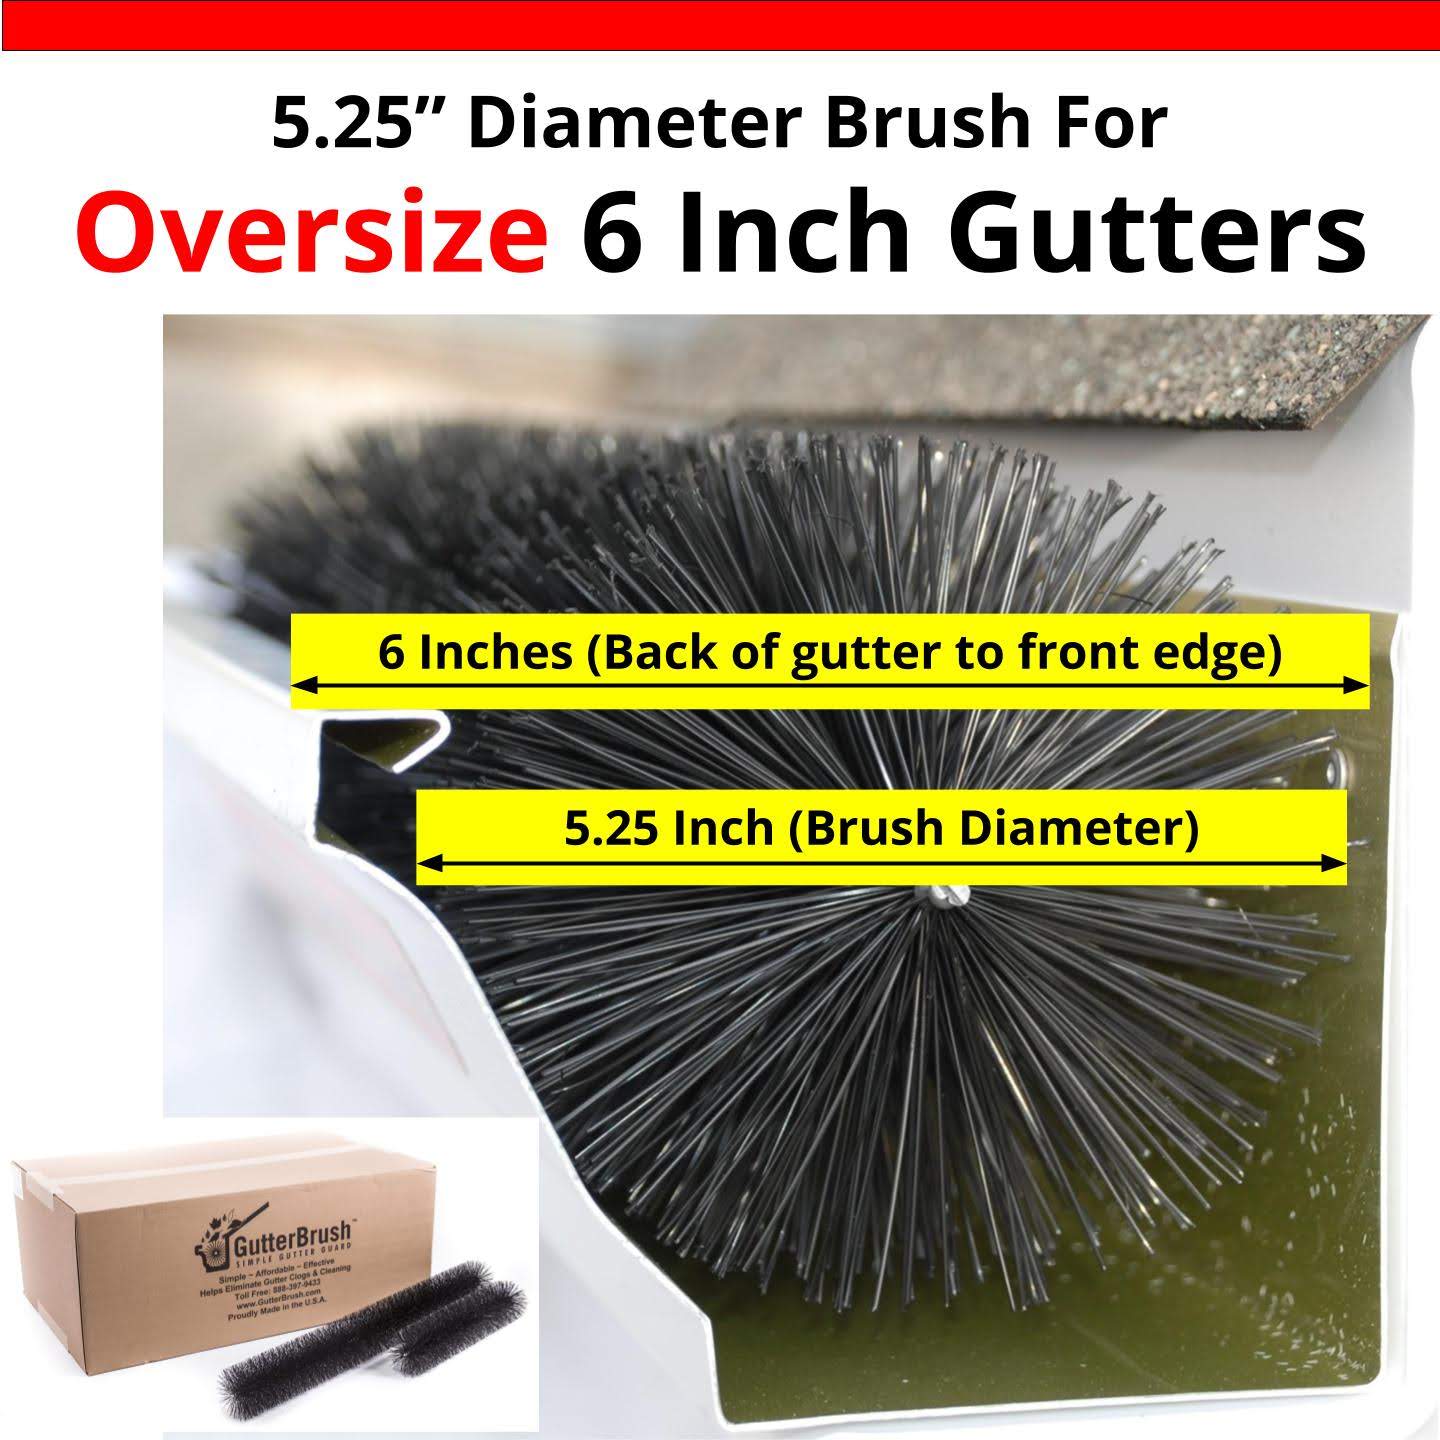 6 Inch Gutter Guards